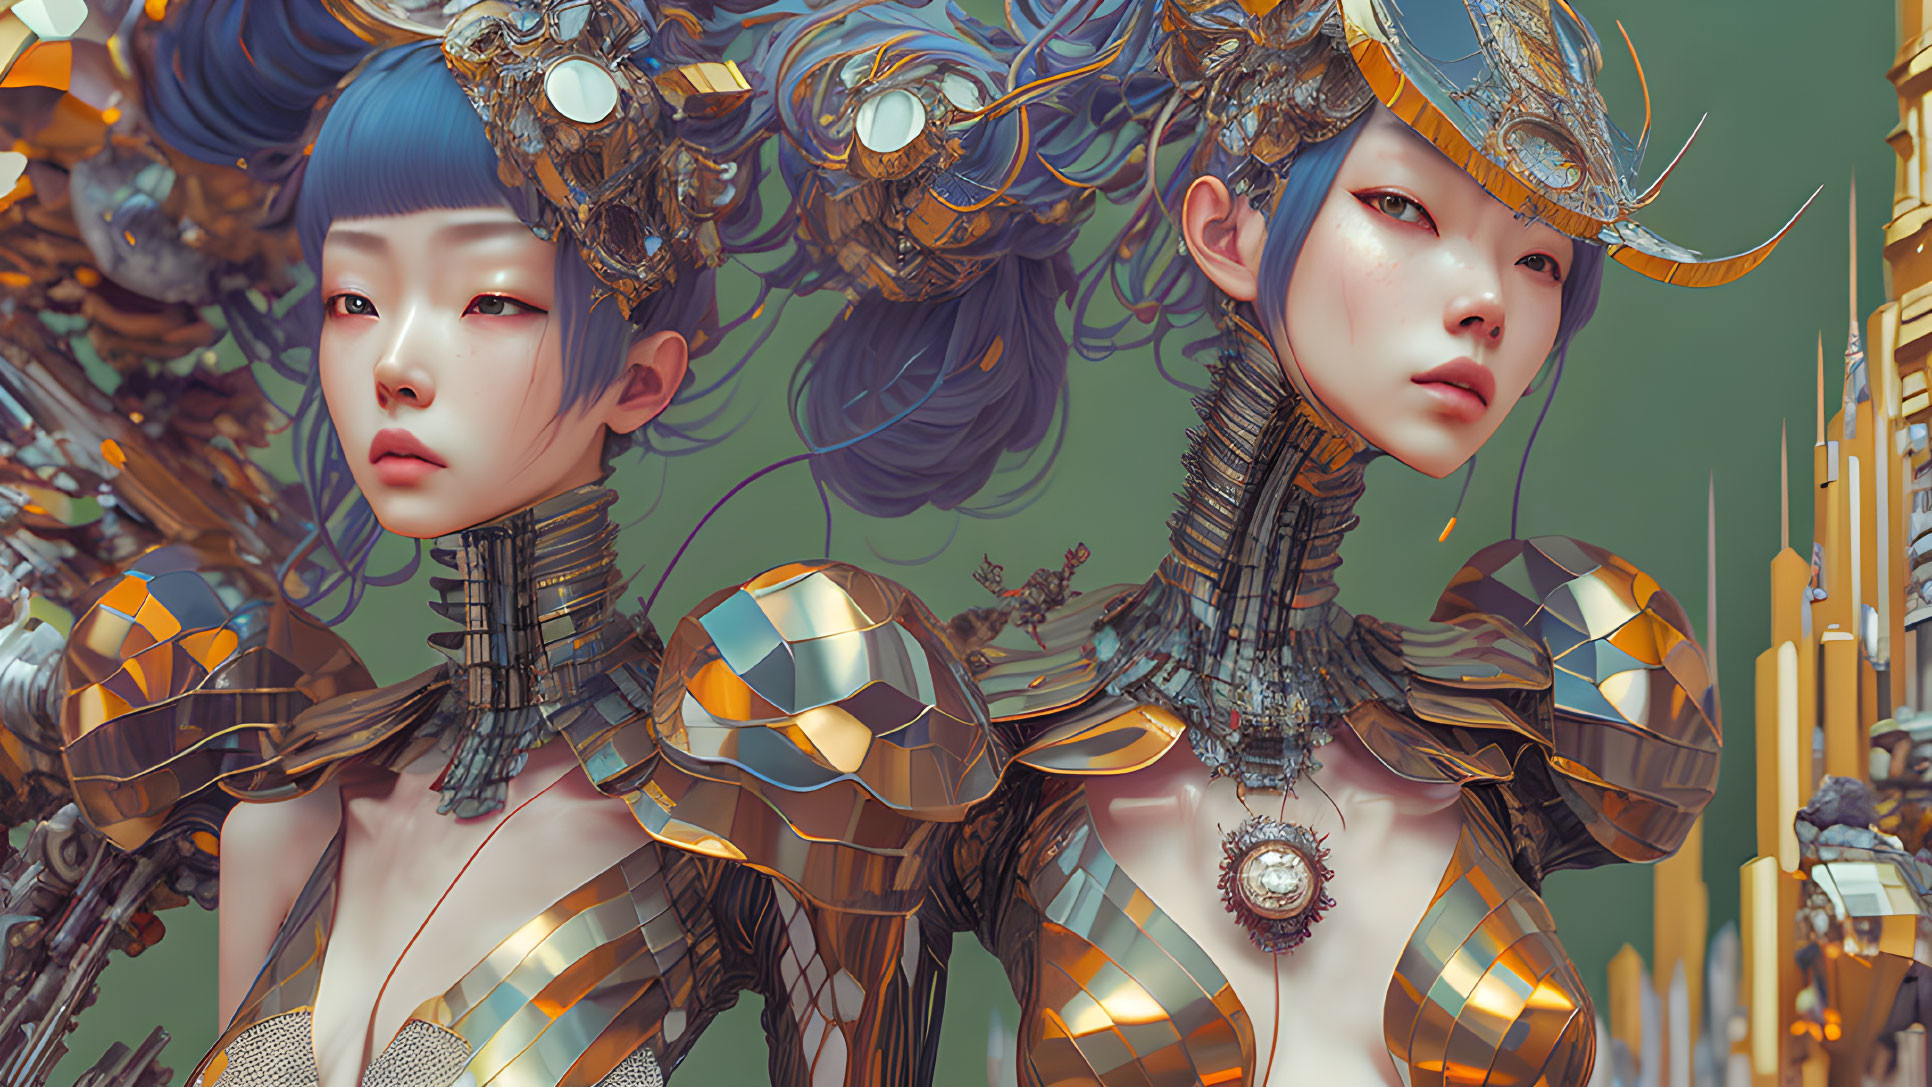 Stylized female figures with golden headpieces and reflective armor on green background